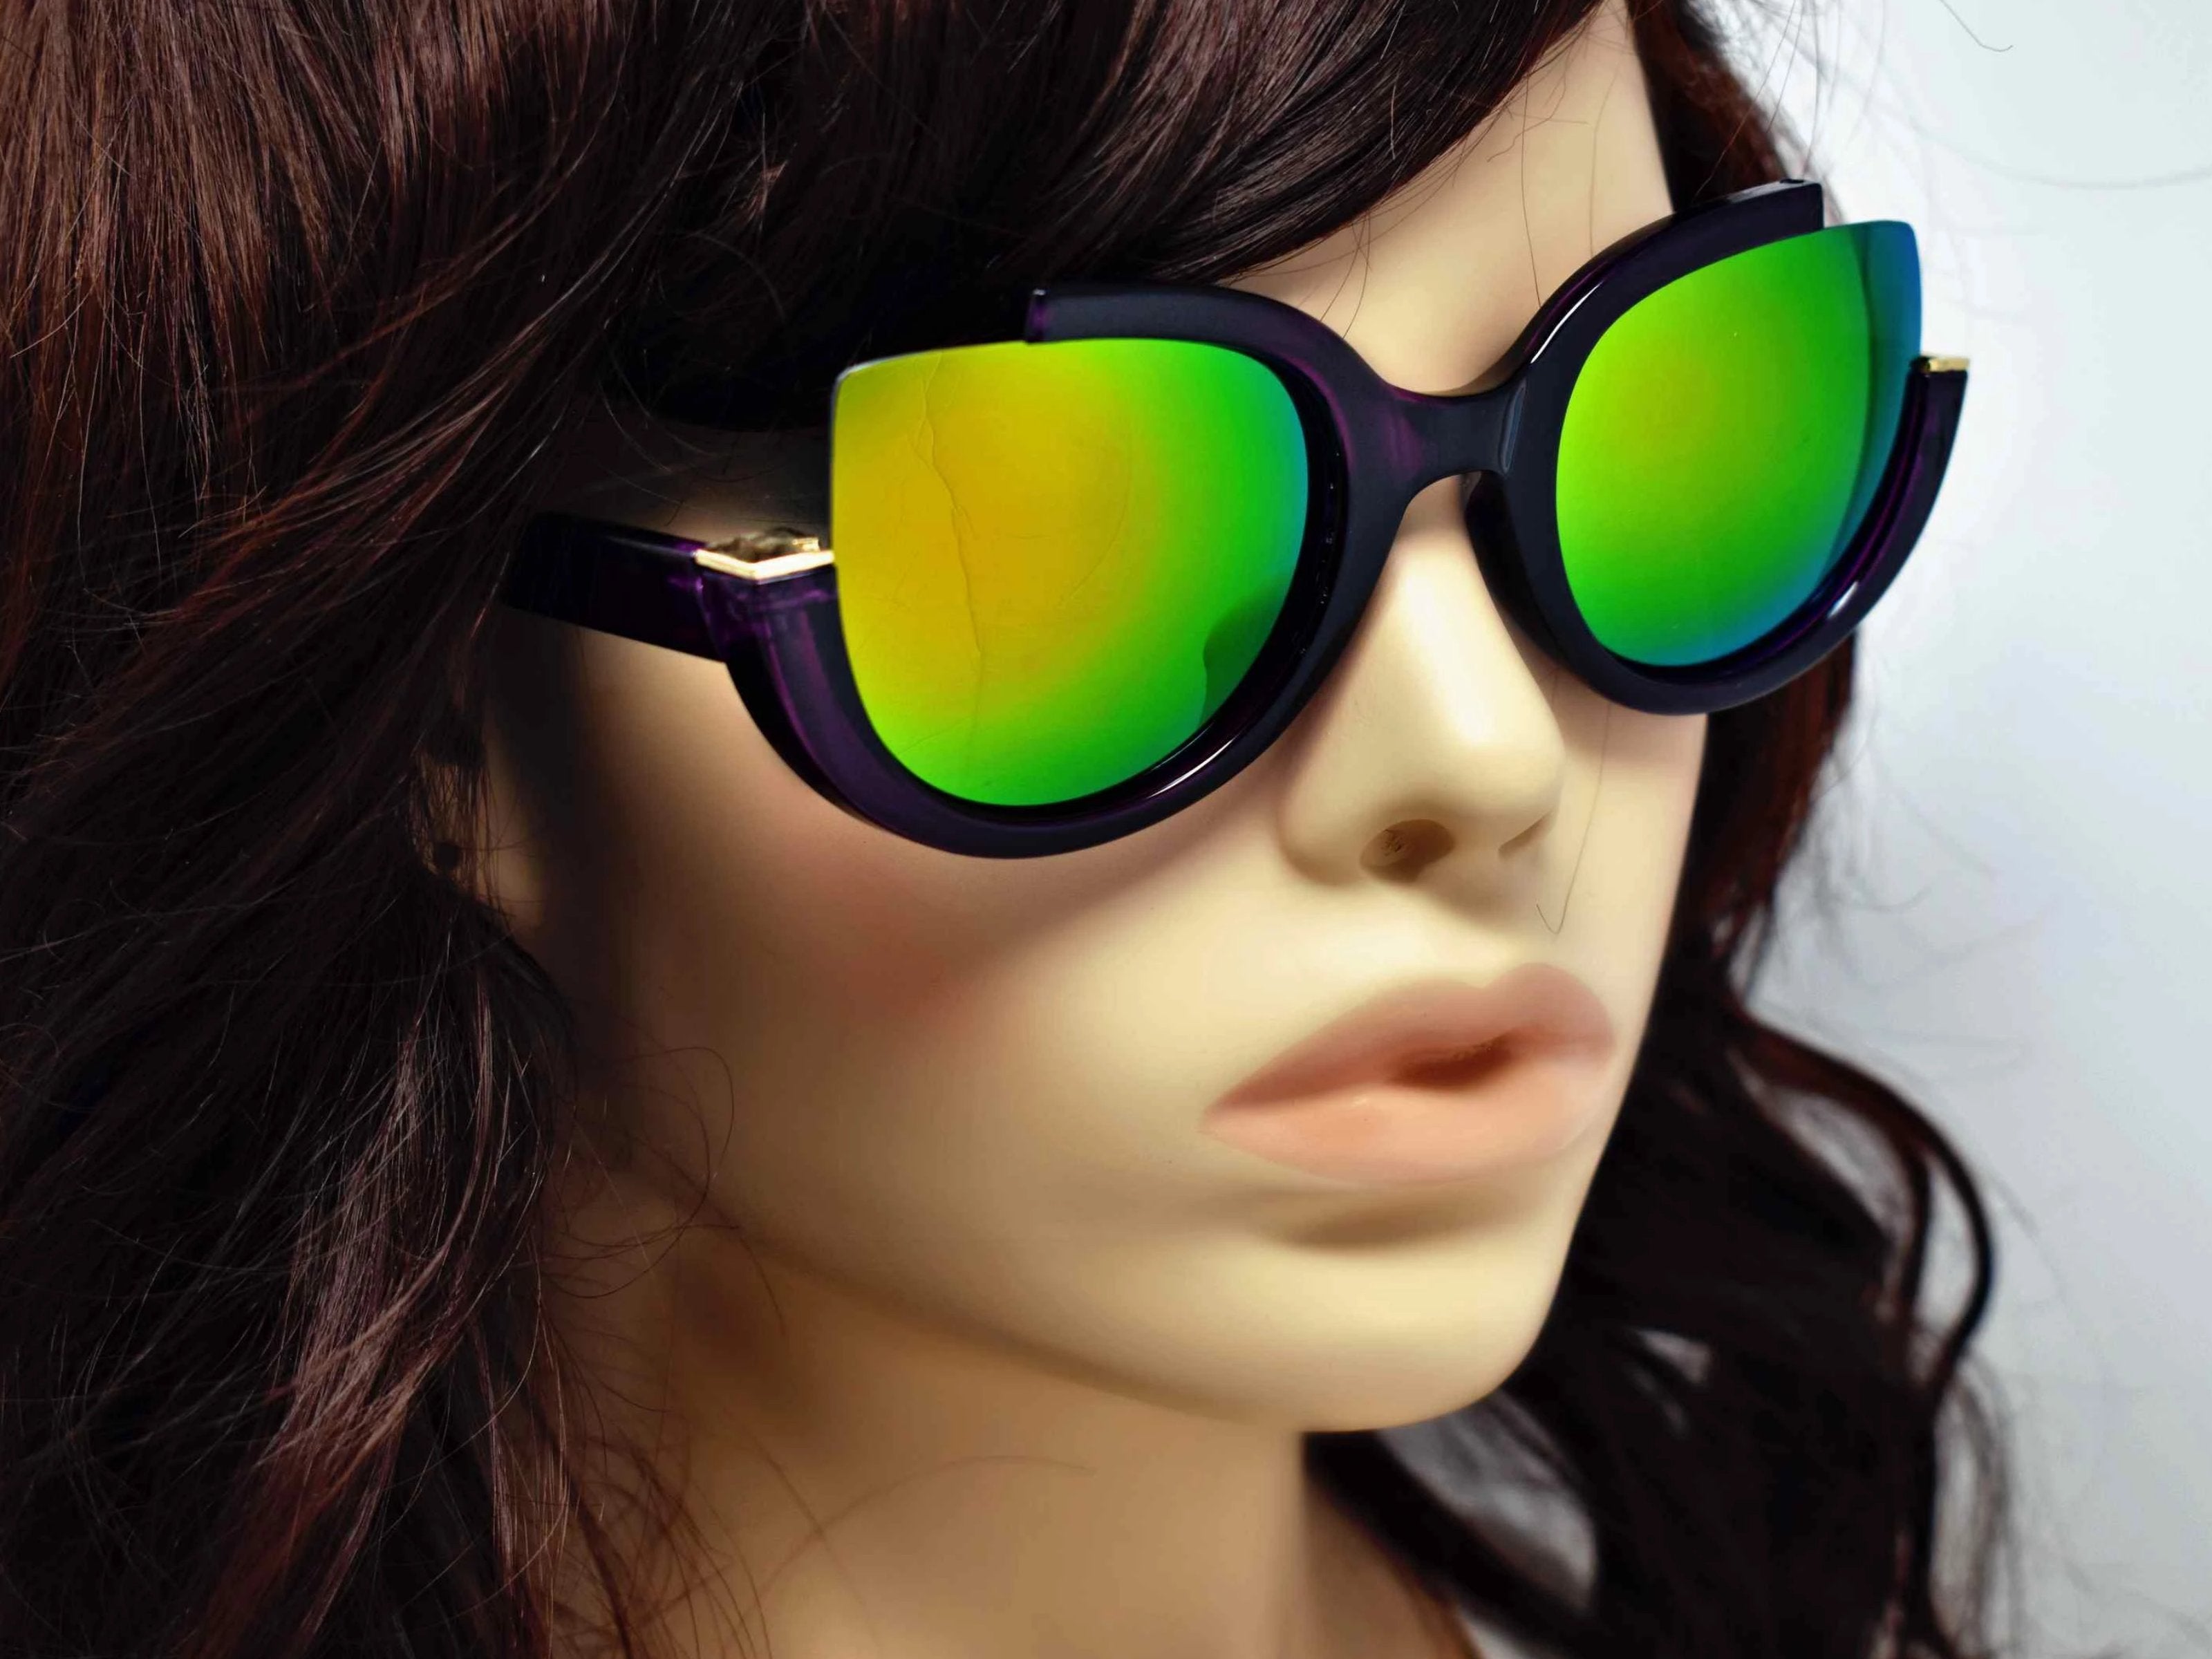 Stunning and stylish is the best way to describe our Larkspur purple cut out frame  with a two-toned green mirrored lens sunglasses.